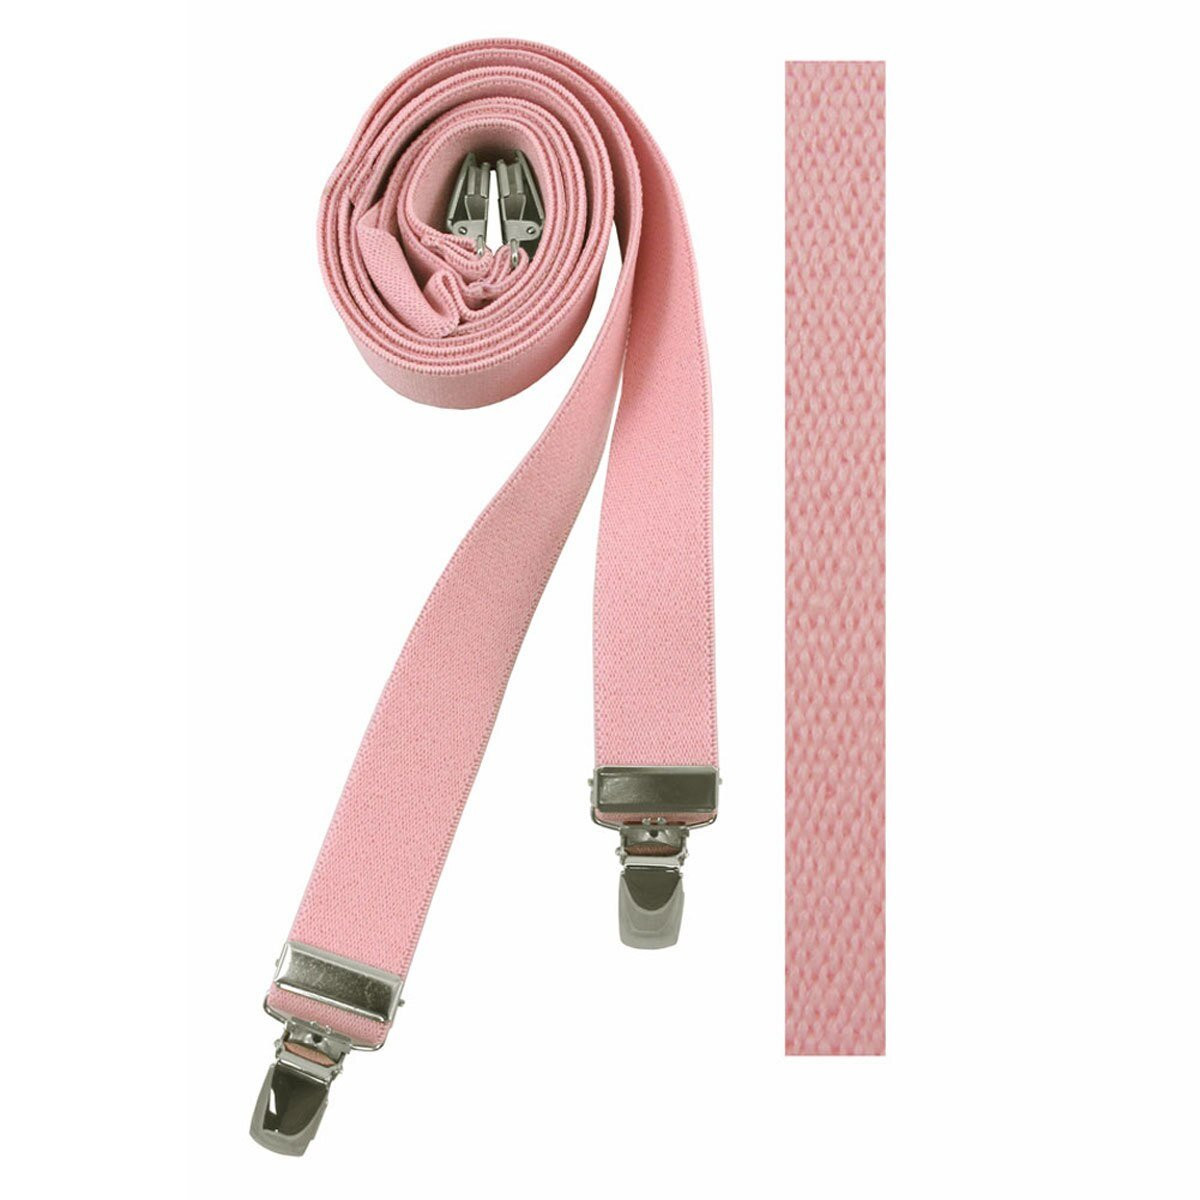 Children's Junior's Solid Suspenders - X-Back - 36 inches Long - 1.0 inch Straps - Pre-Tied Clip-On - Pink